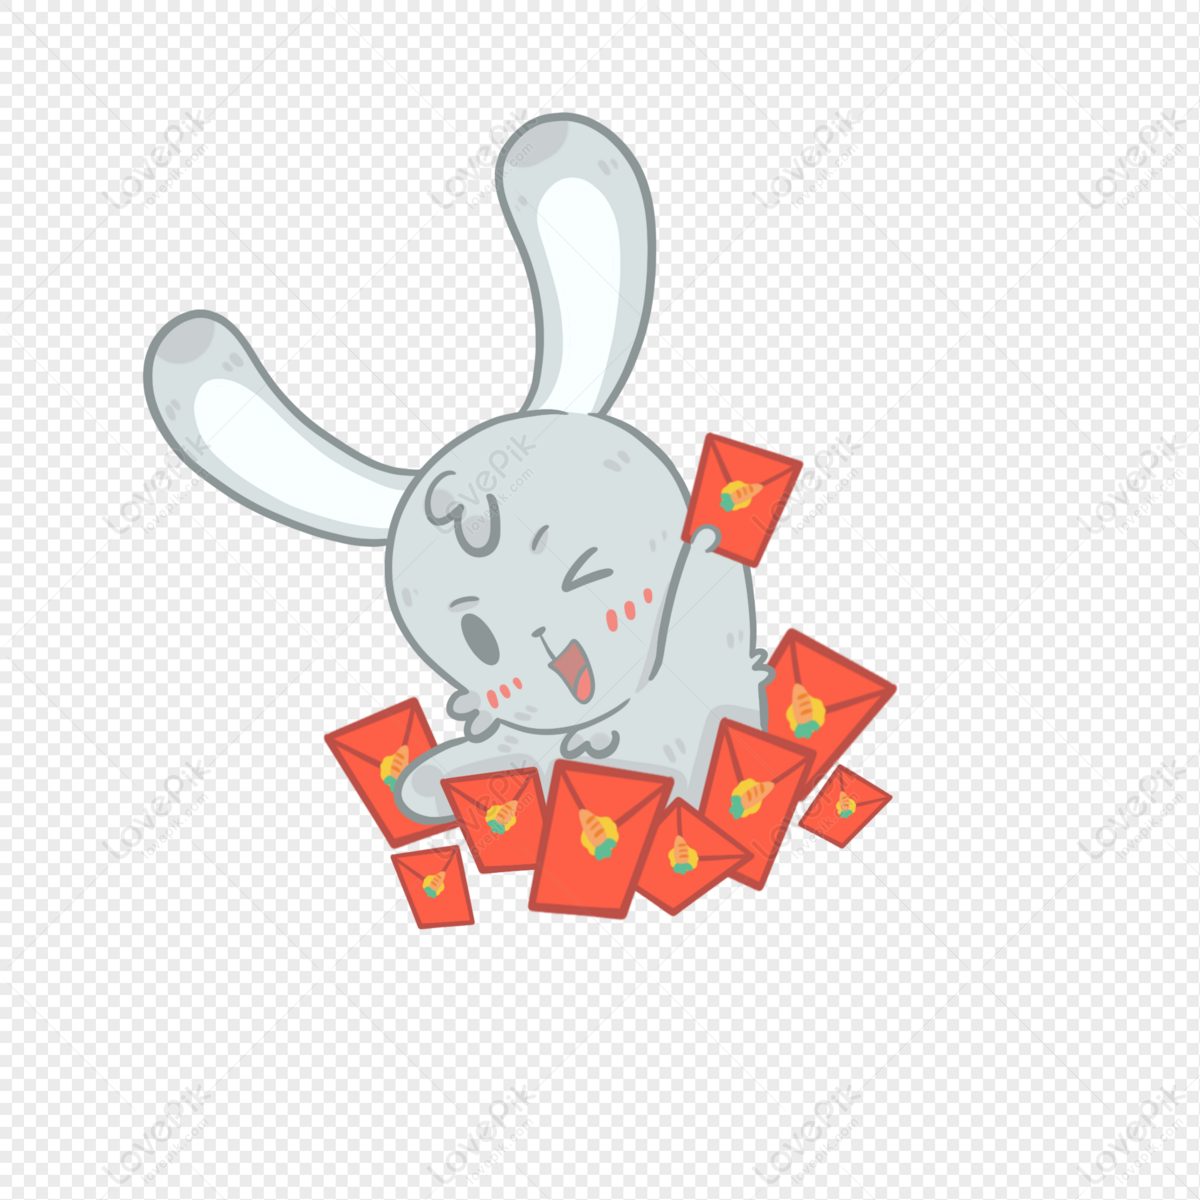 Cute Rabbit Holding Red Envelope Chinese Stock Vector (Royalty Free)  2212541863